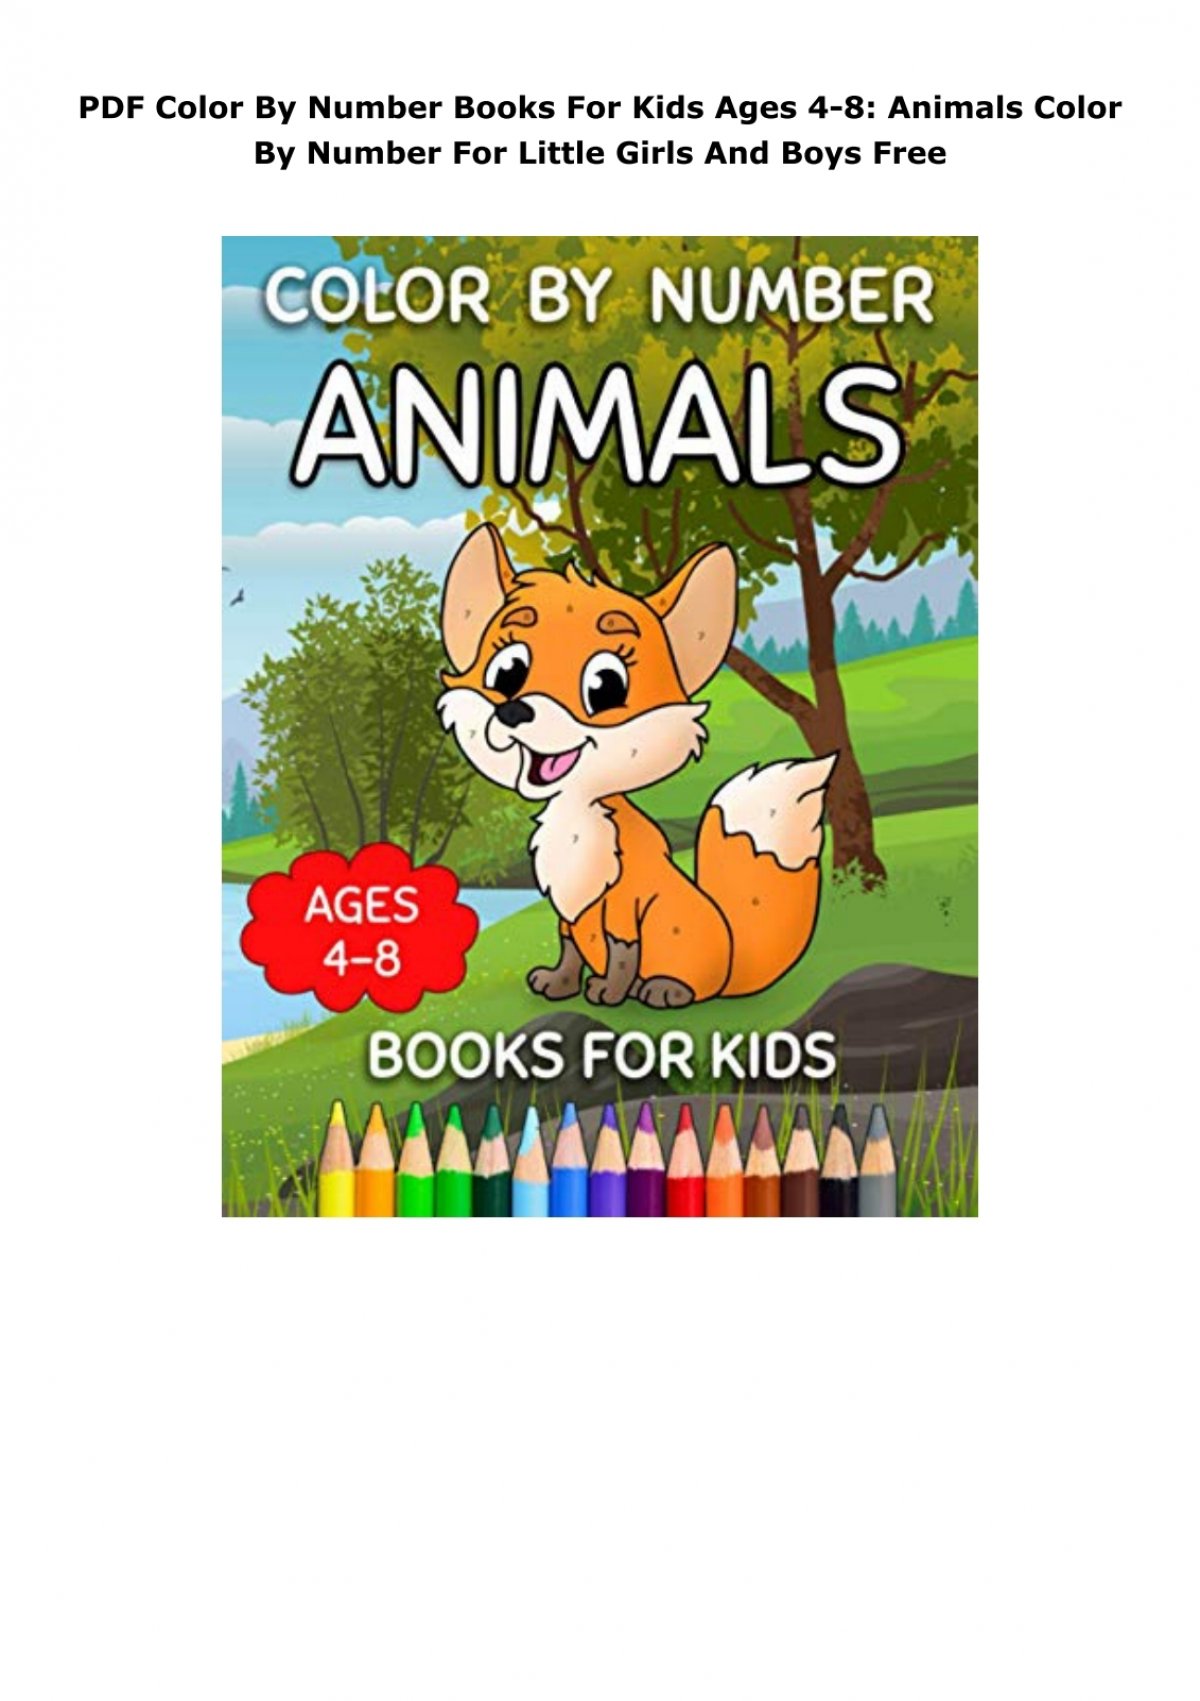 pdf-color-by-number-books-for-kids-ages-4-8-animals-color-by-number